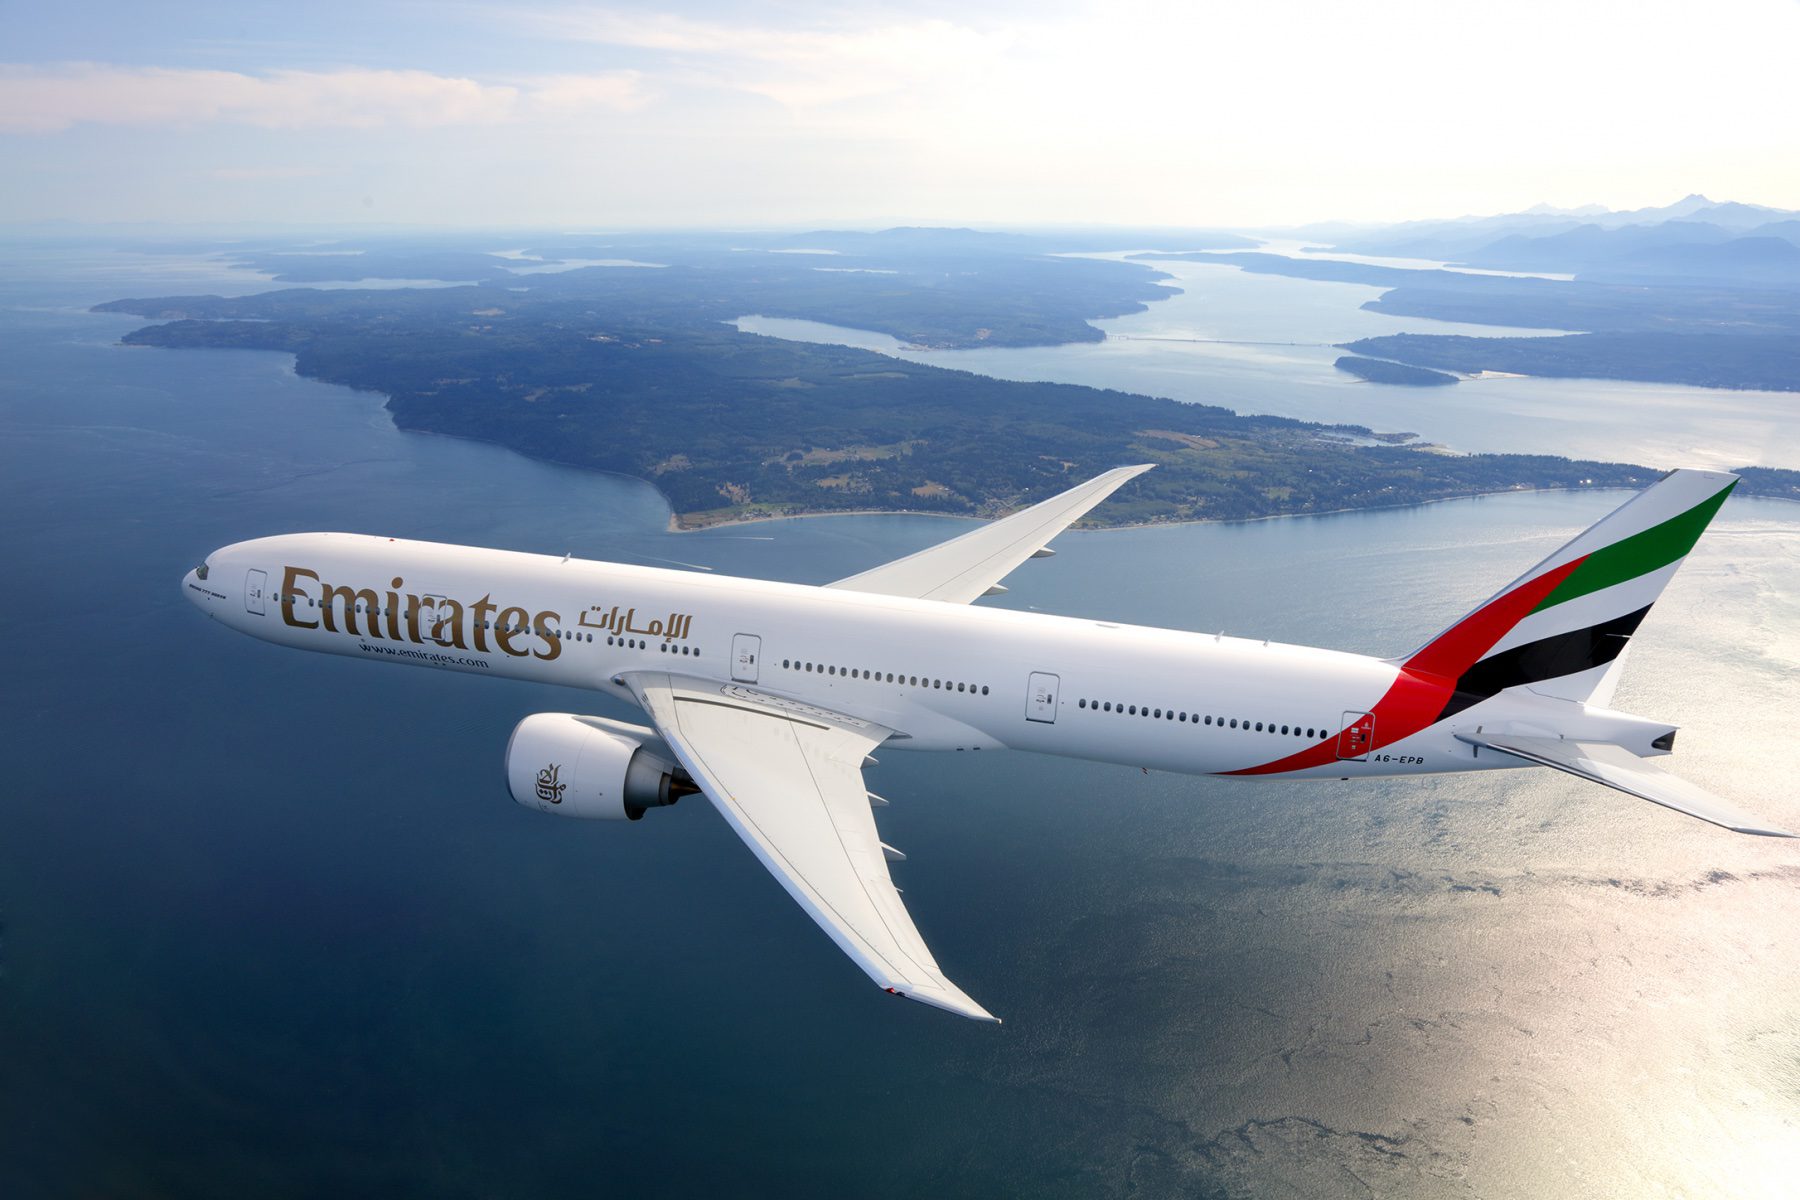 Emirates Airline To Accept Bitcoin Payments and Launch NFT Collection - Travel News, Insights & Resources.